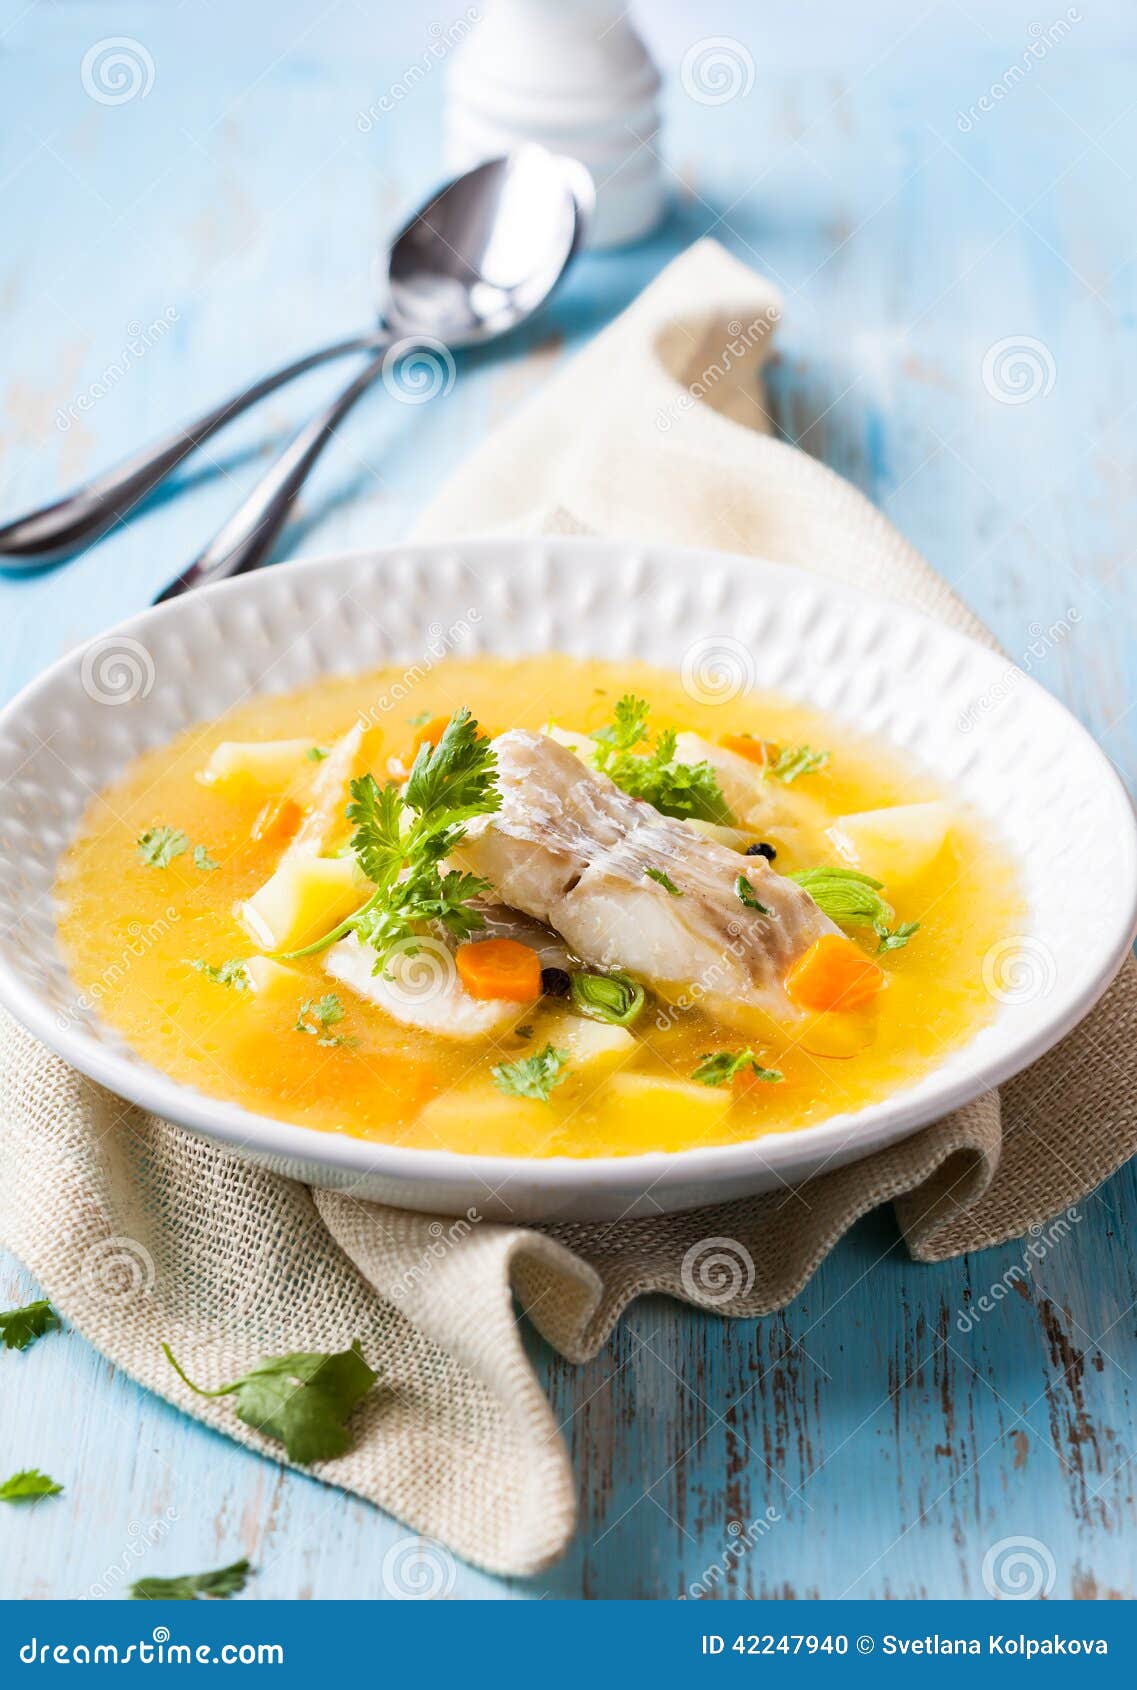 Fish soup stock photo. Image of cuisine, dine, delicious - 42247940